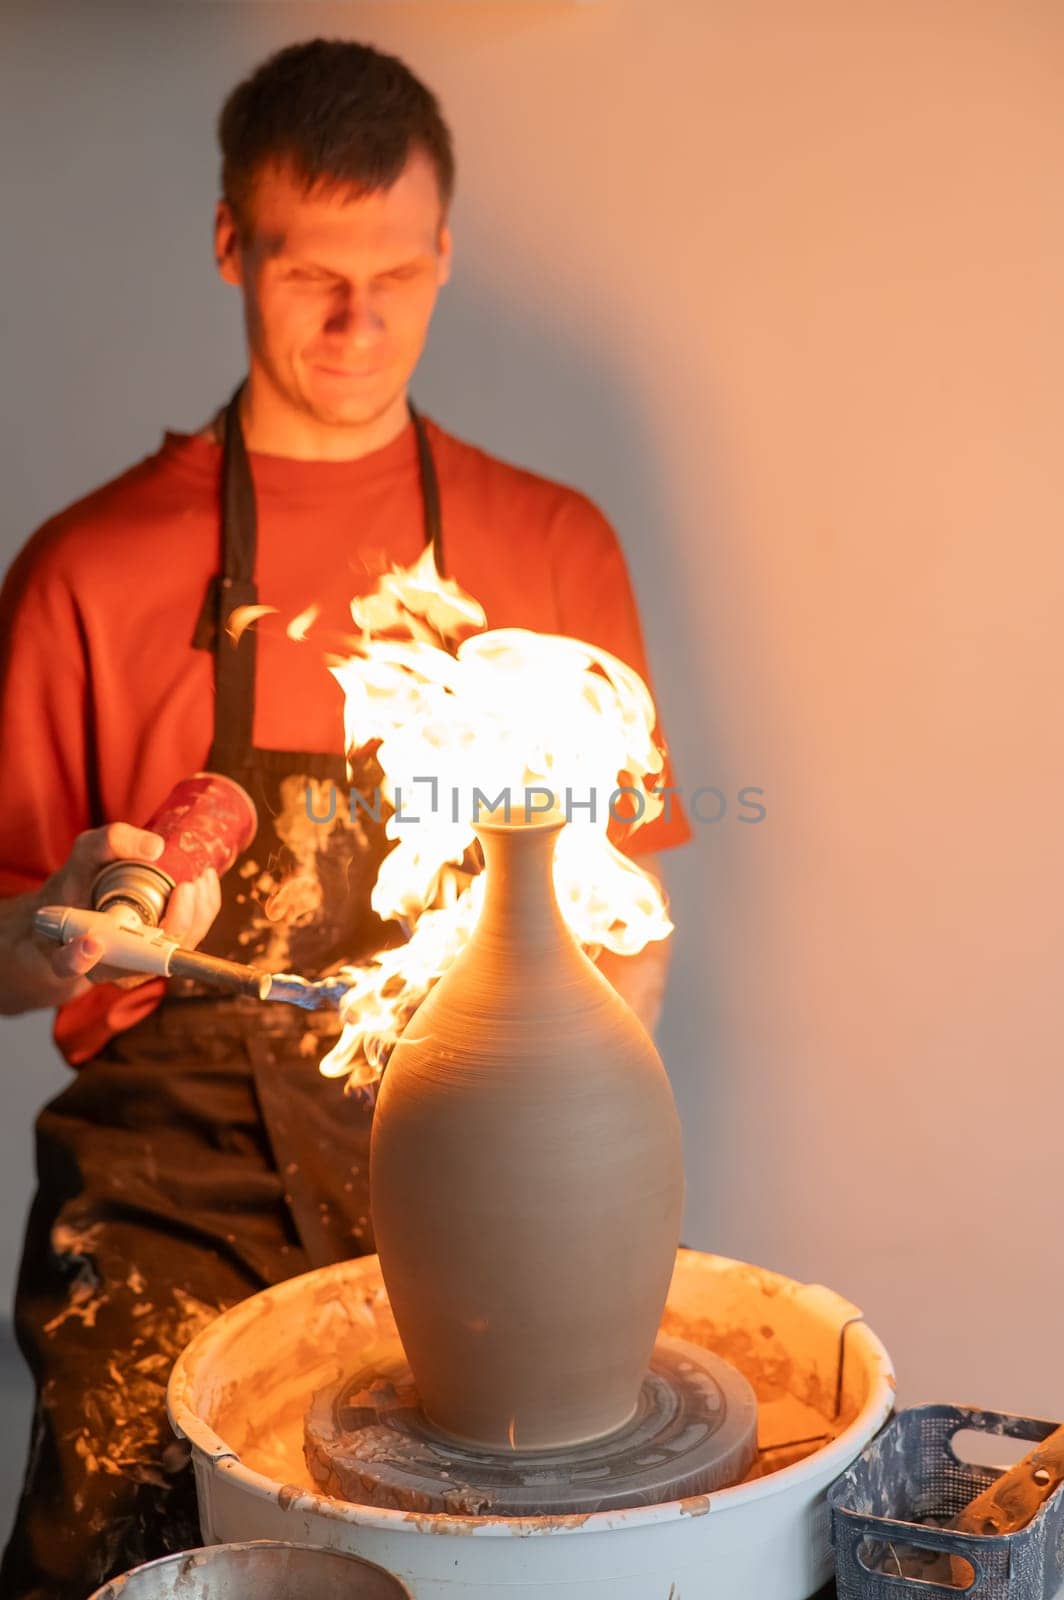 A potter burns a jug with a gas burner on a potter's wheel. Vertical photo